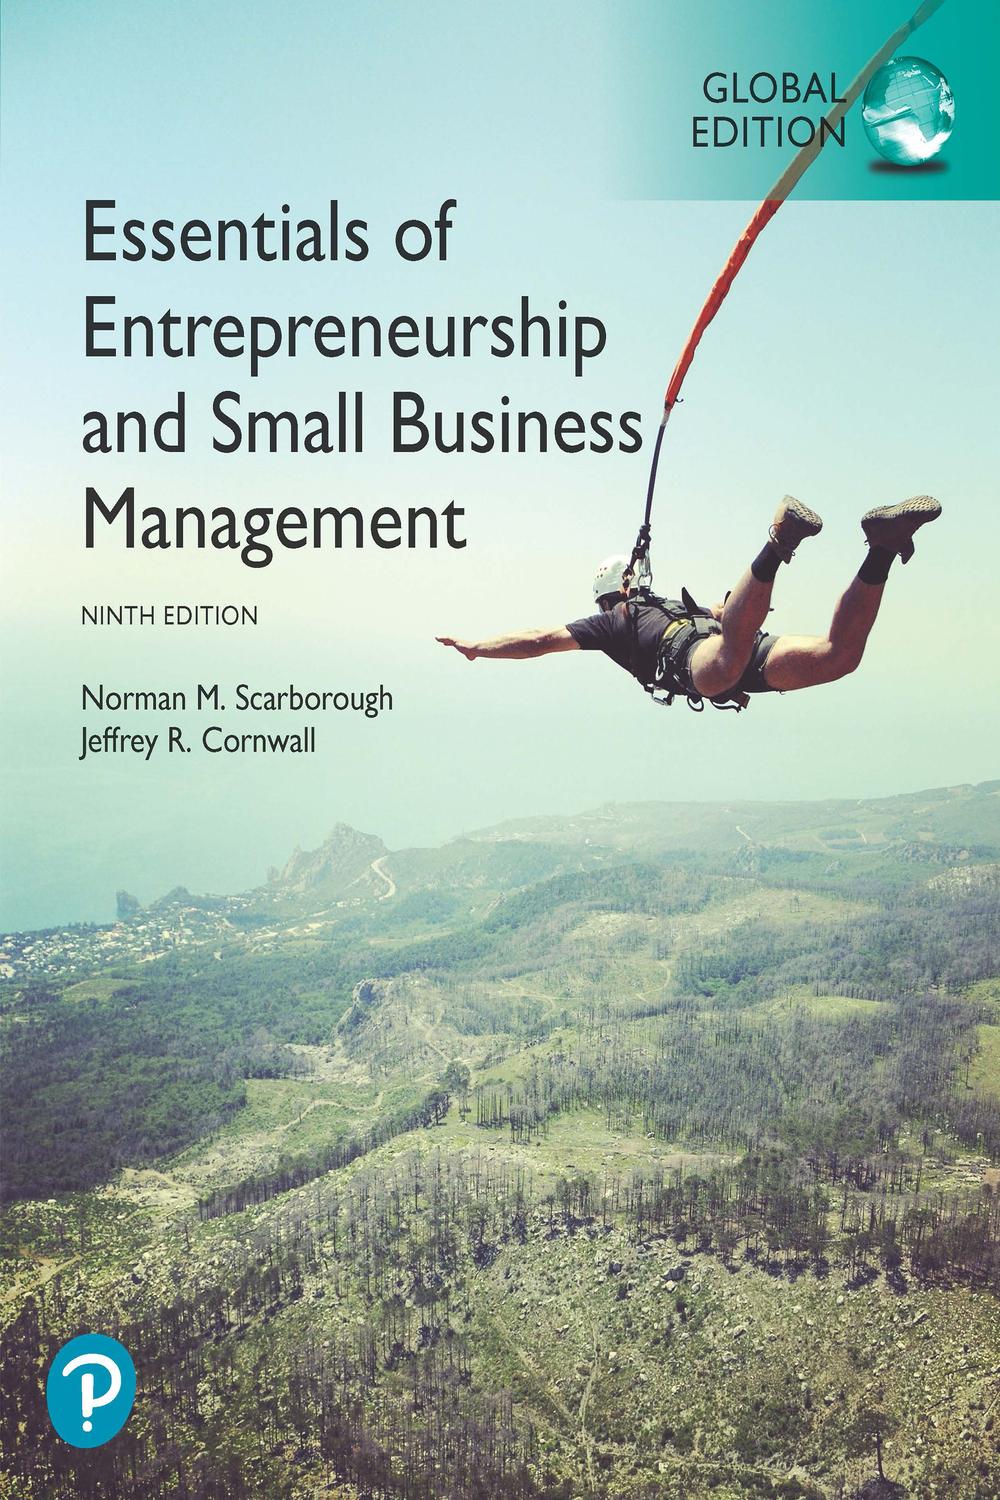 article review on entrepreneurship and small business management